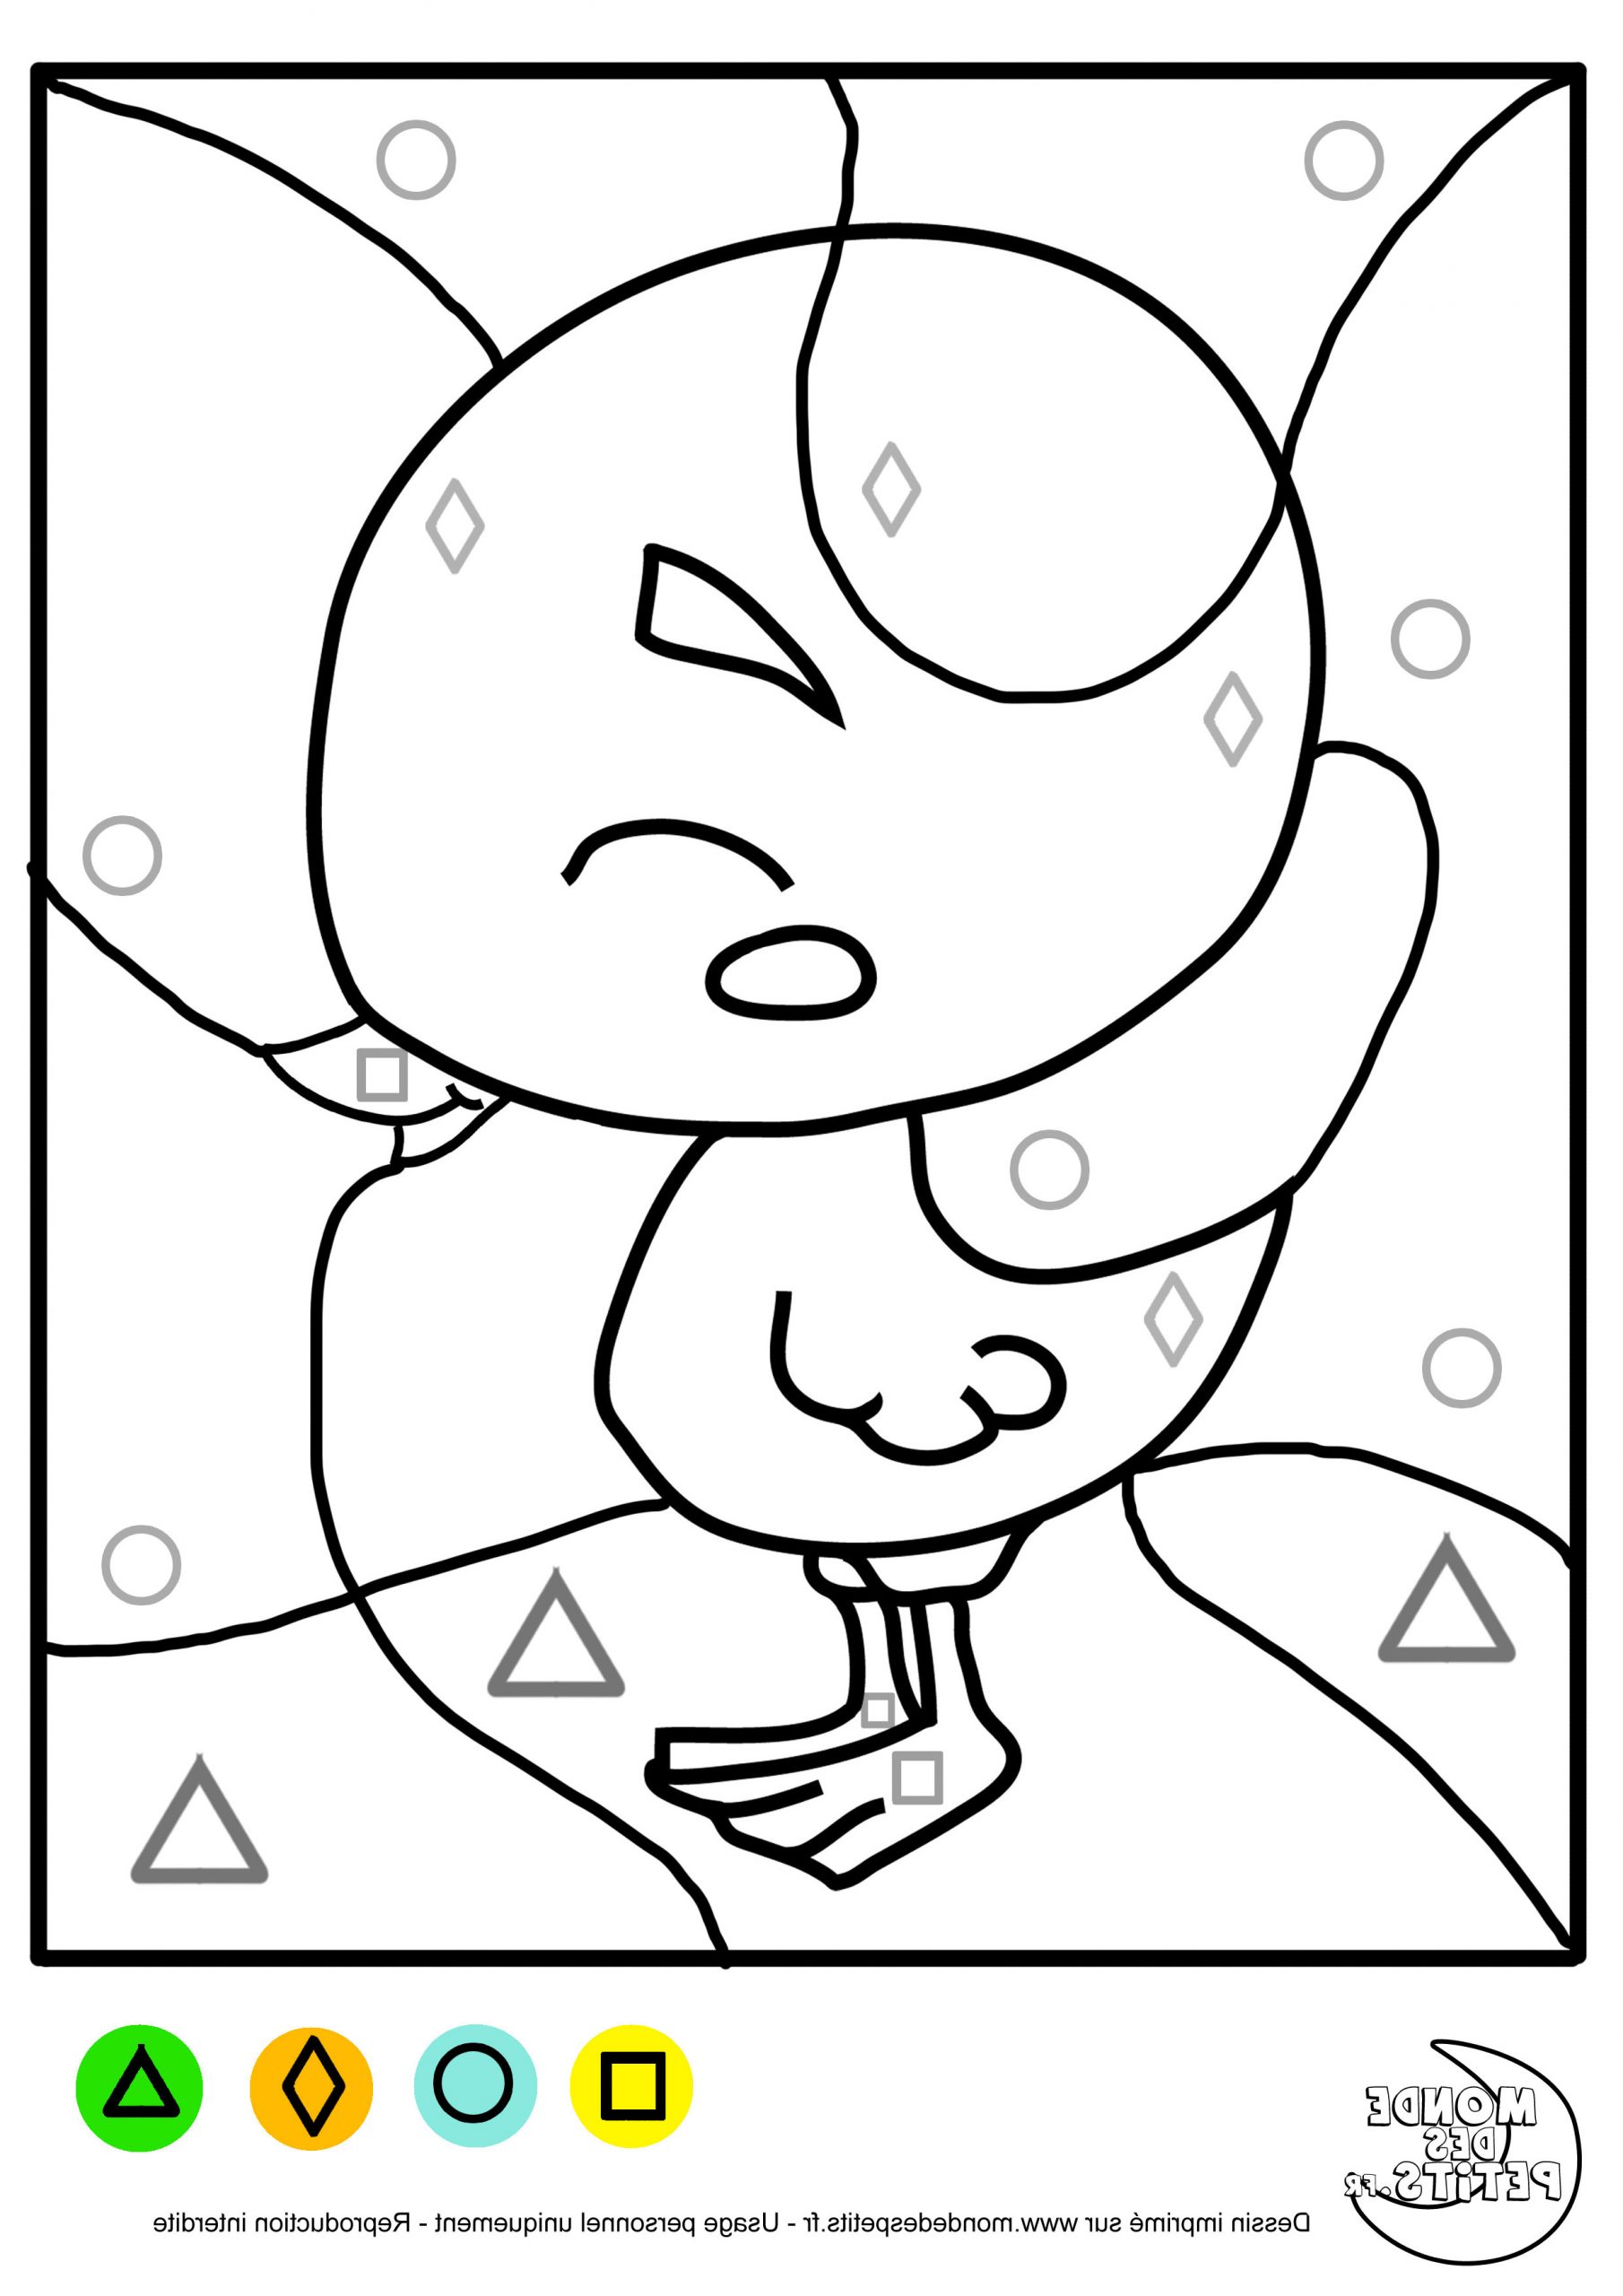 coloriage code maternelle